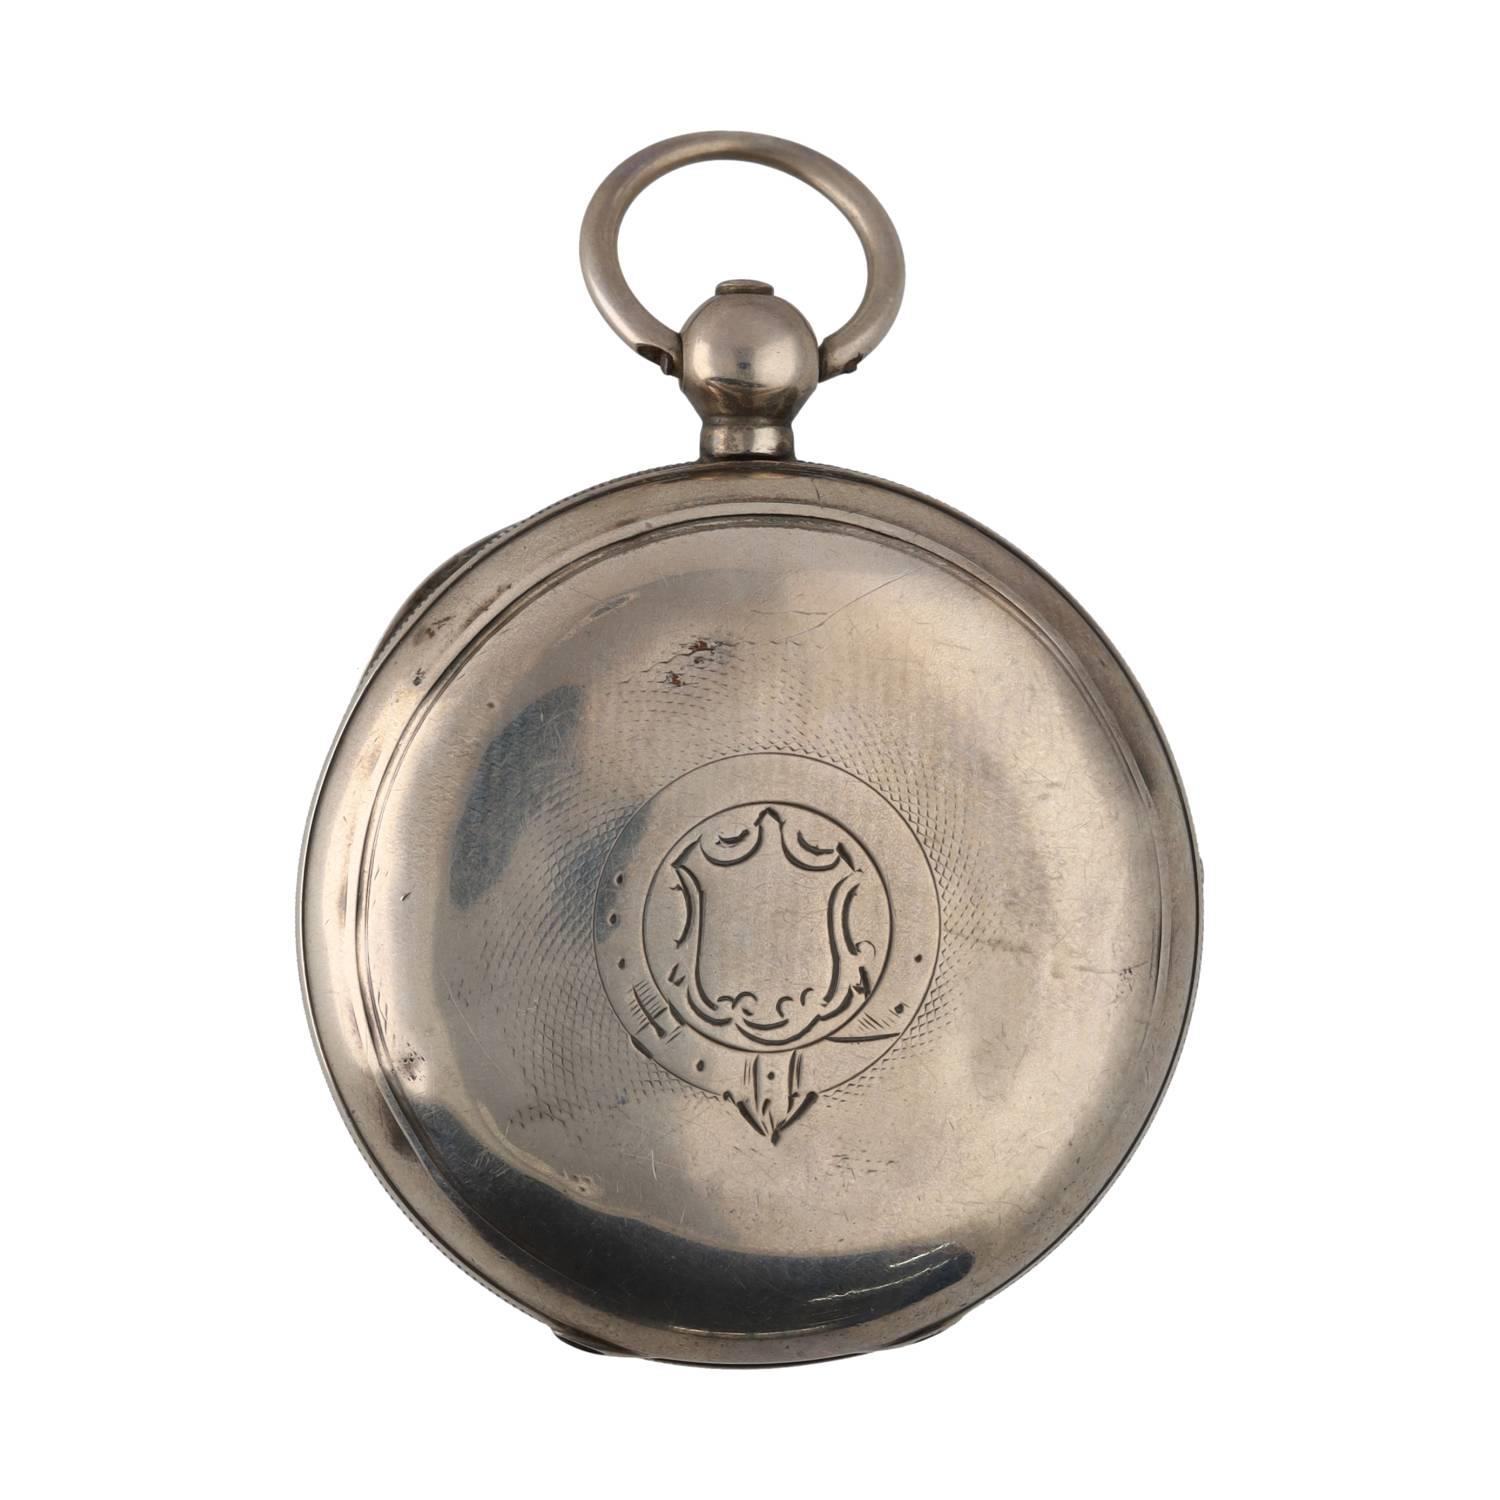 American Waltham silver lever pocket watch, circa 1889, serial no. 4220046, signed movement with - Image 3 of 3